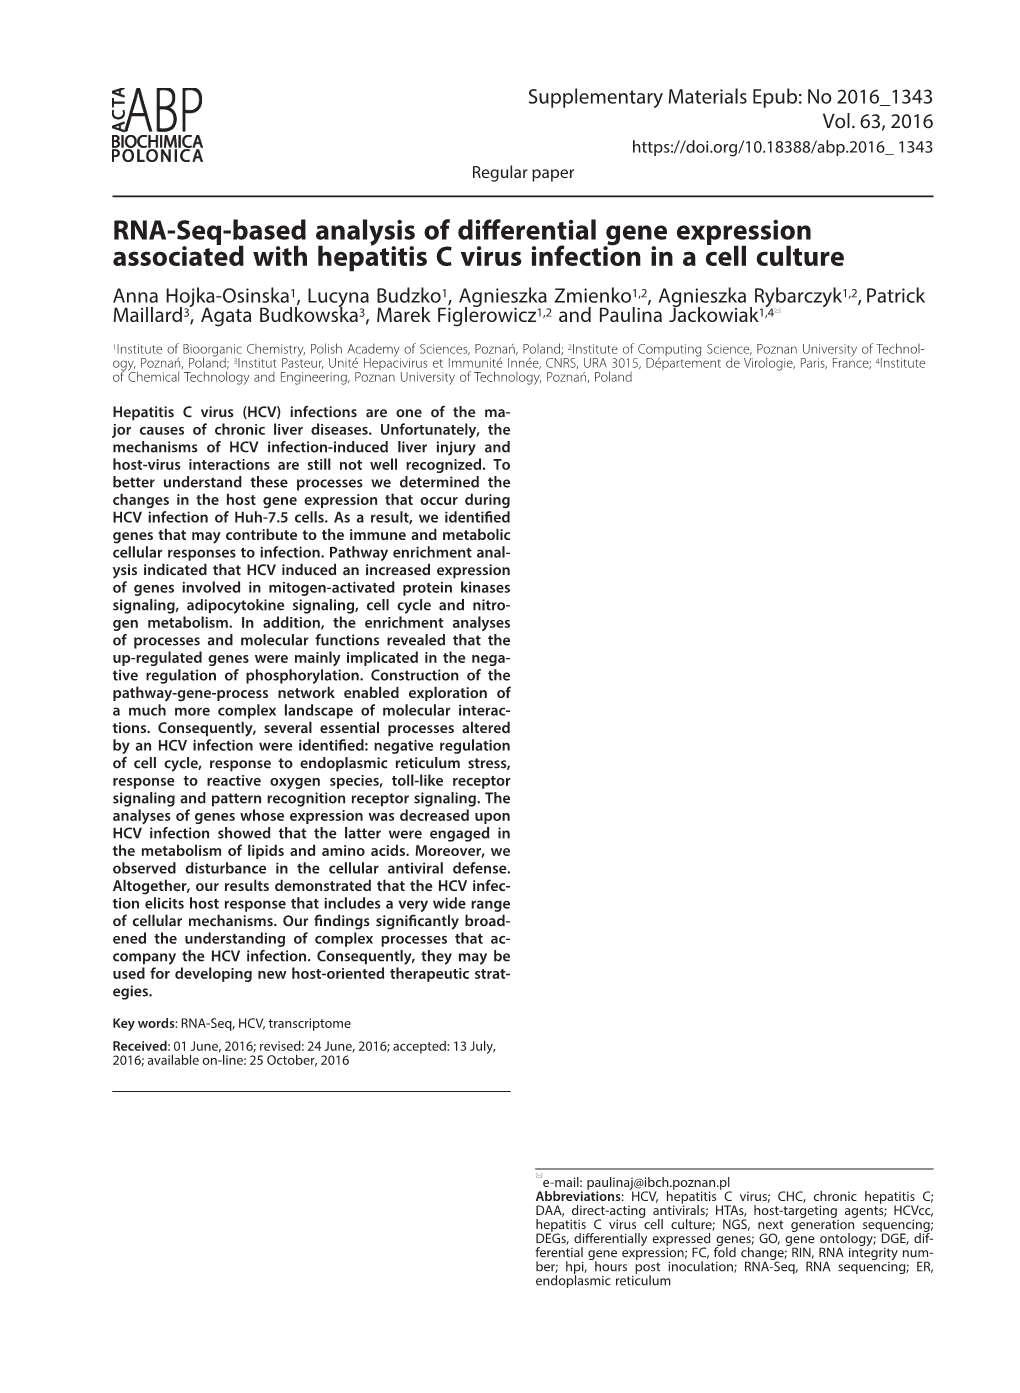 RNA-Seq-Based Analysis of Differential Gene Expression